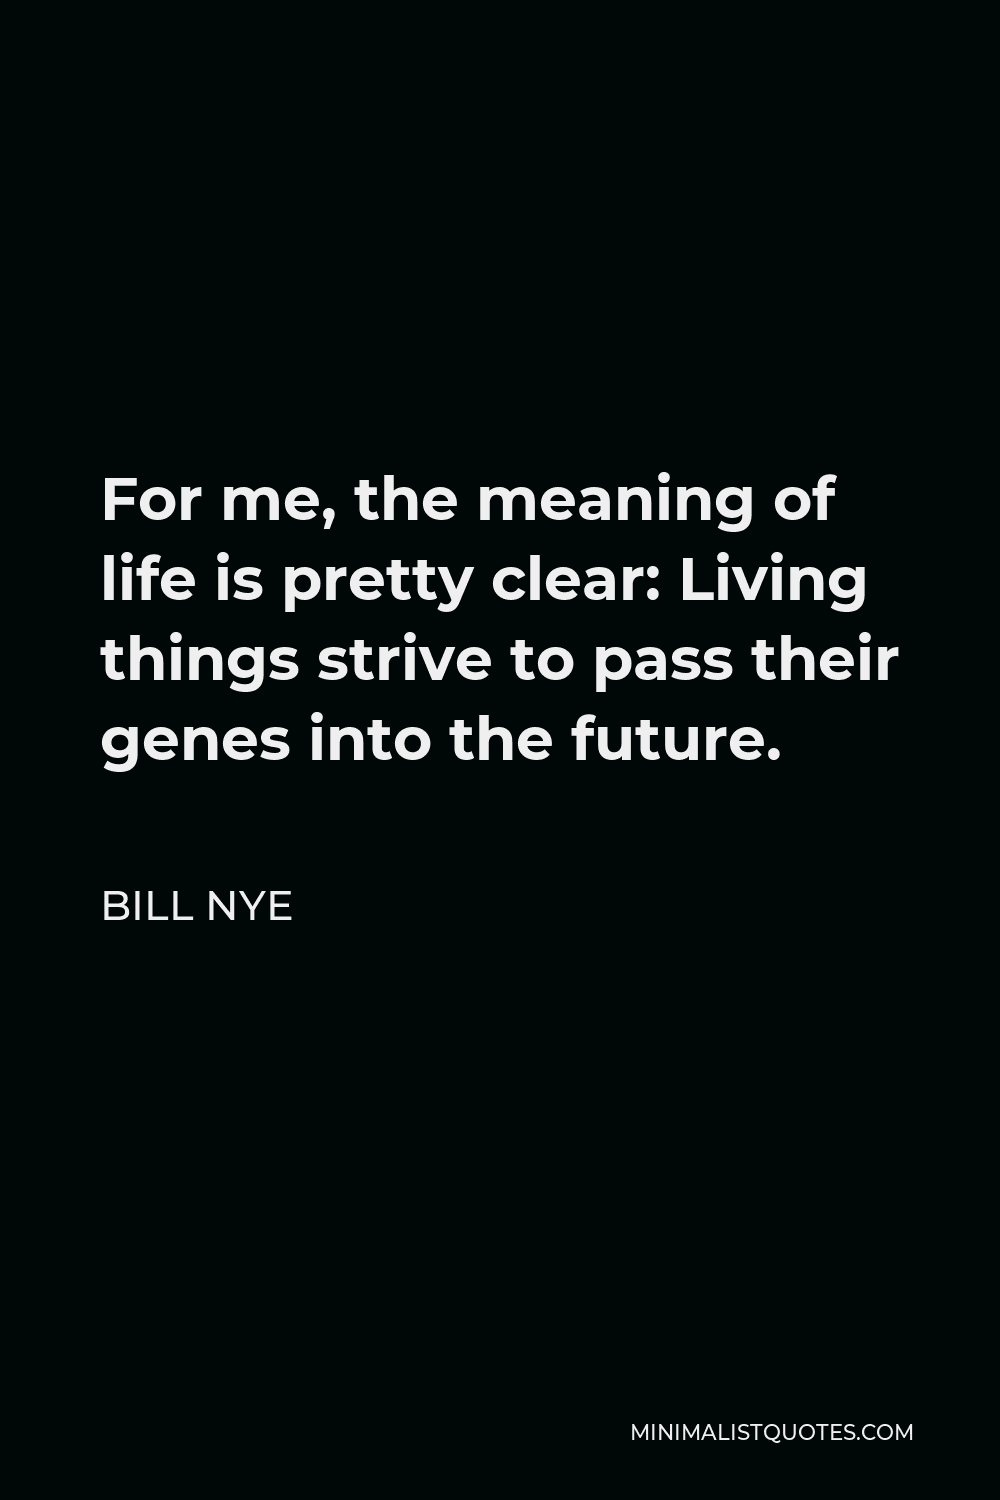 Bill Nye Quote - For me, the meaning of life is pretty clear: Living things strive to pass their genes into the future.